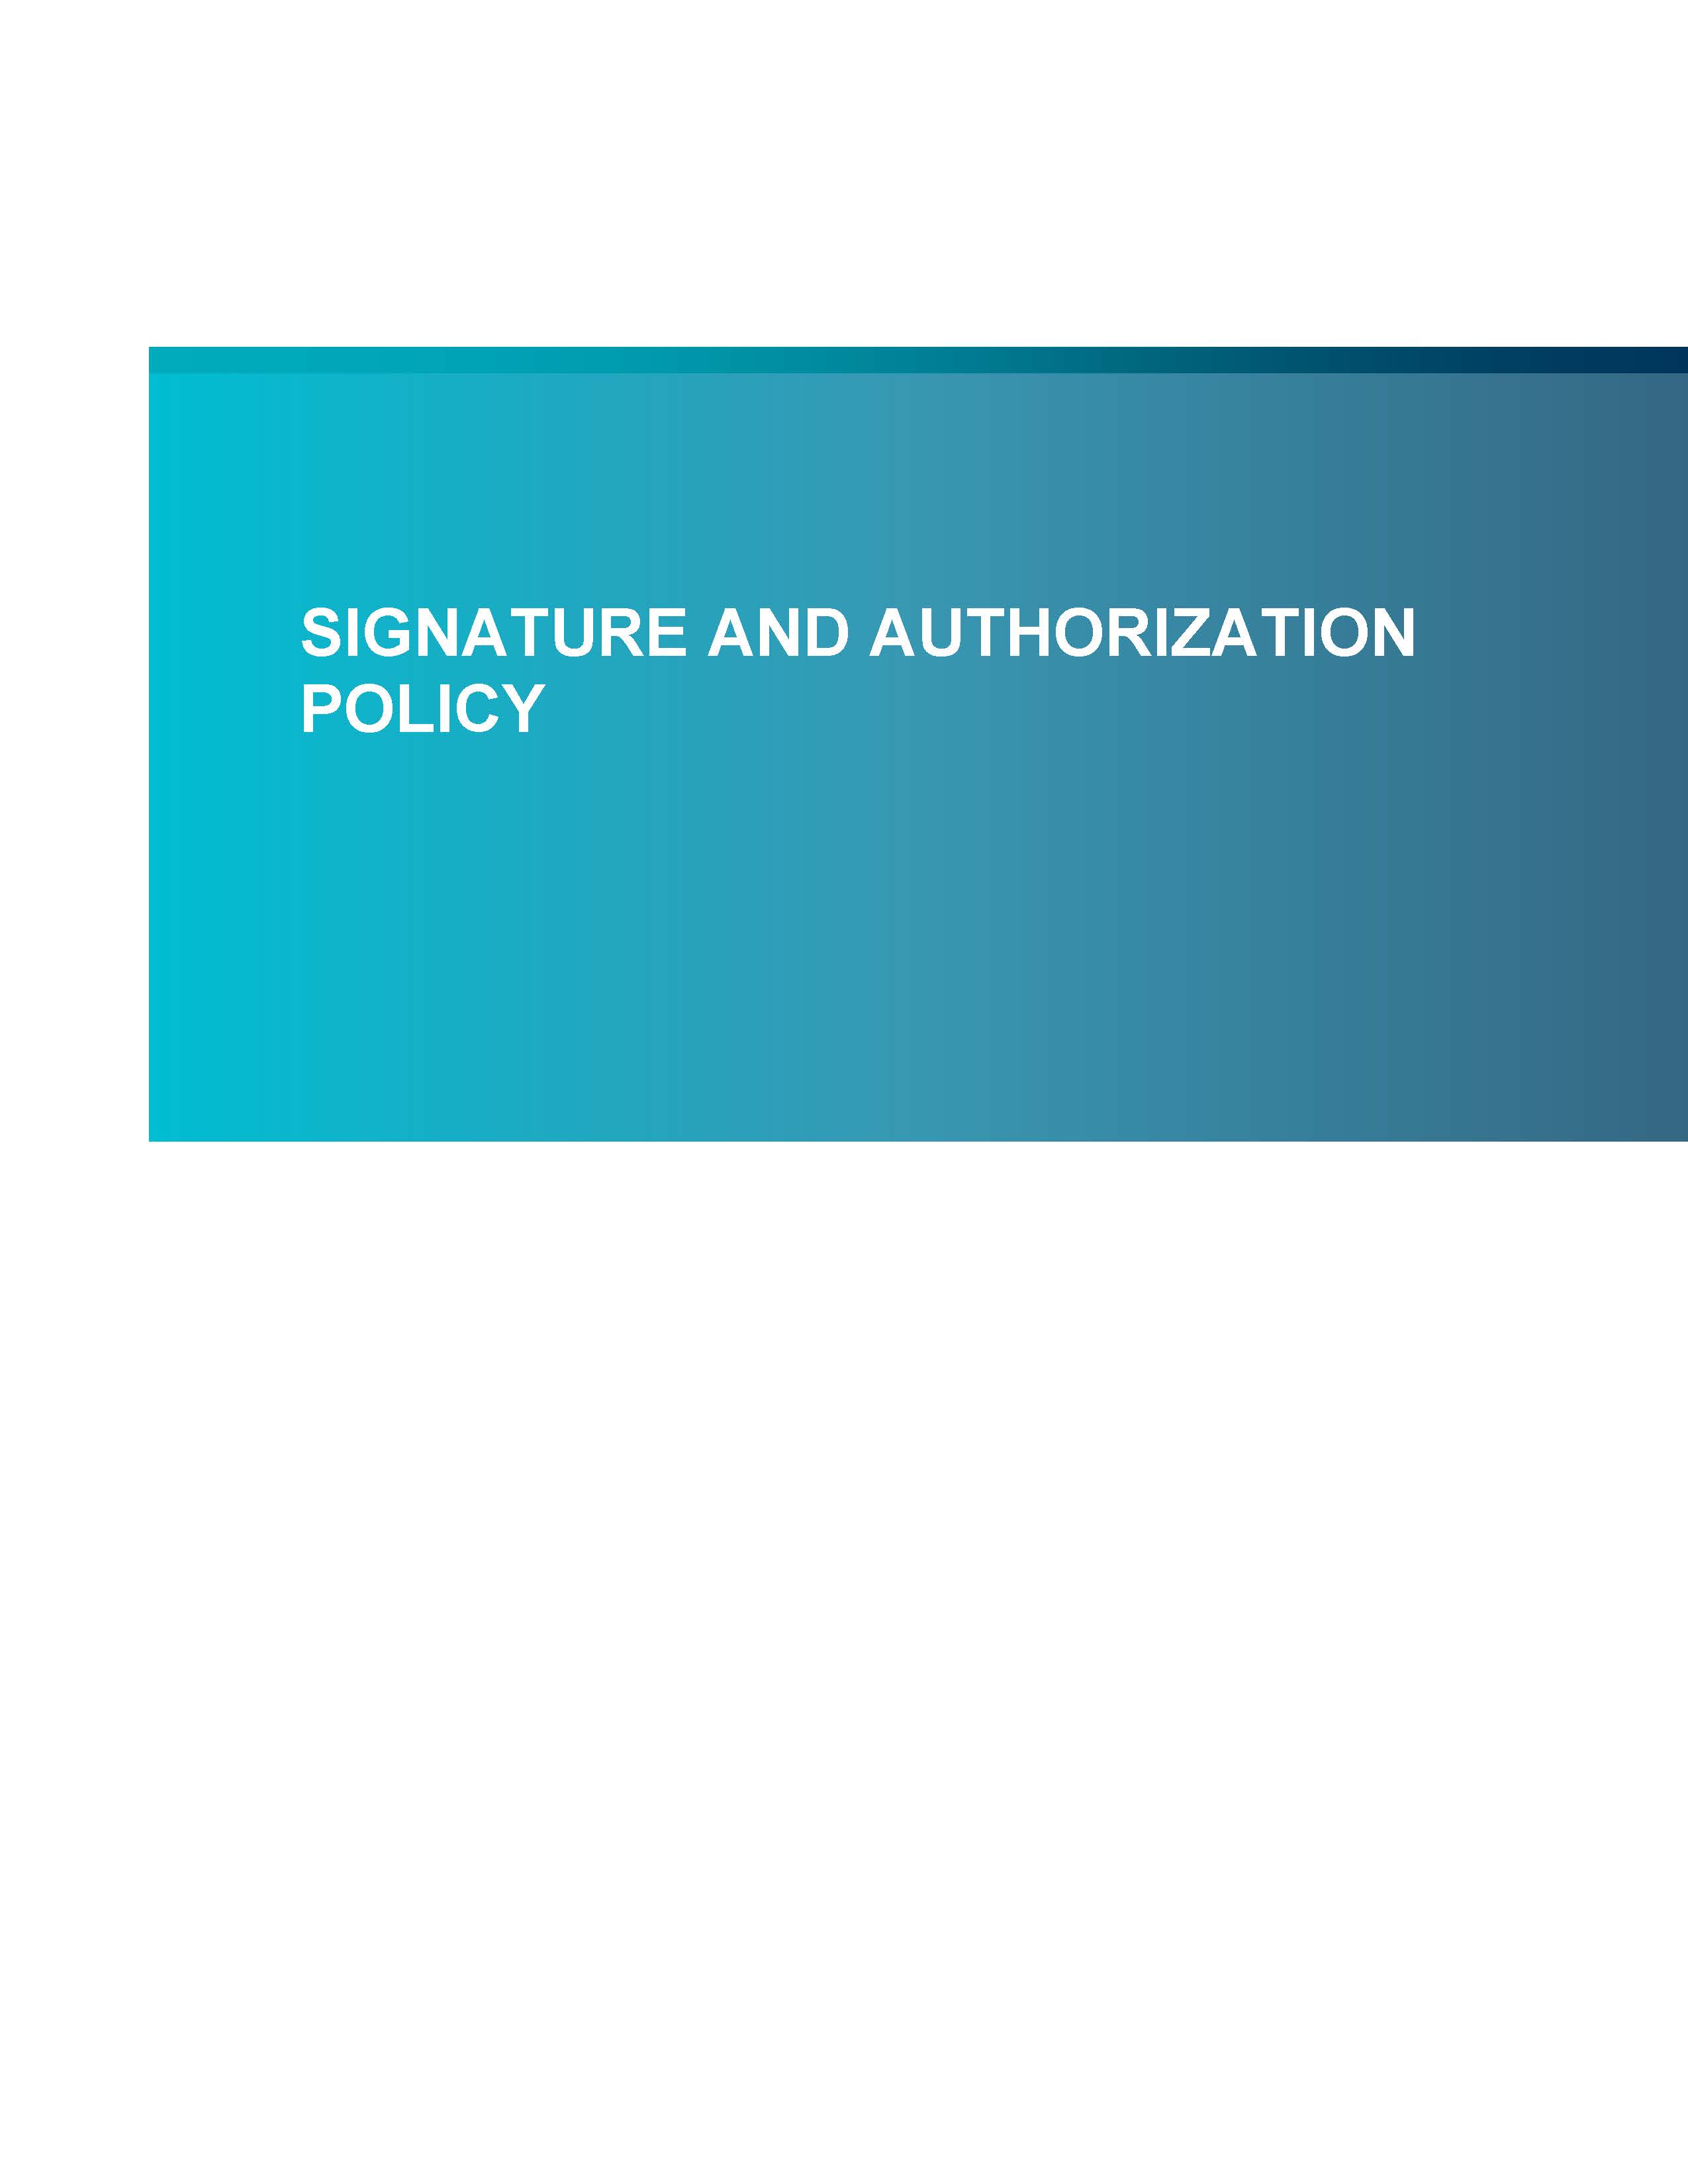 Signature and Authorization Policy